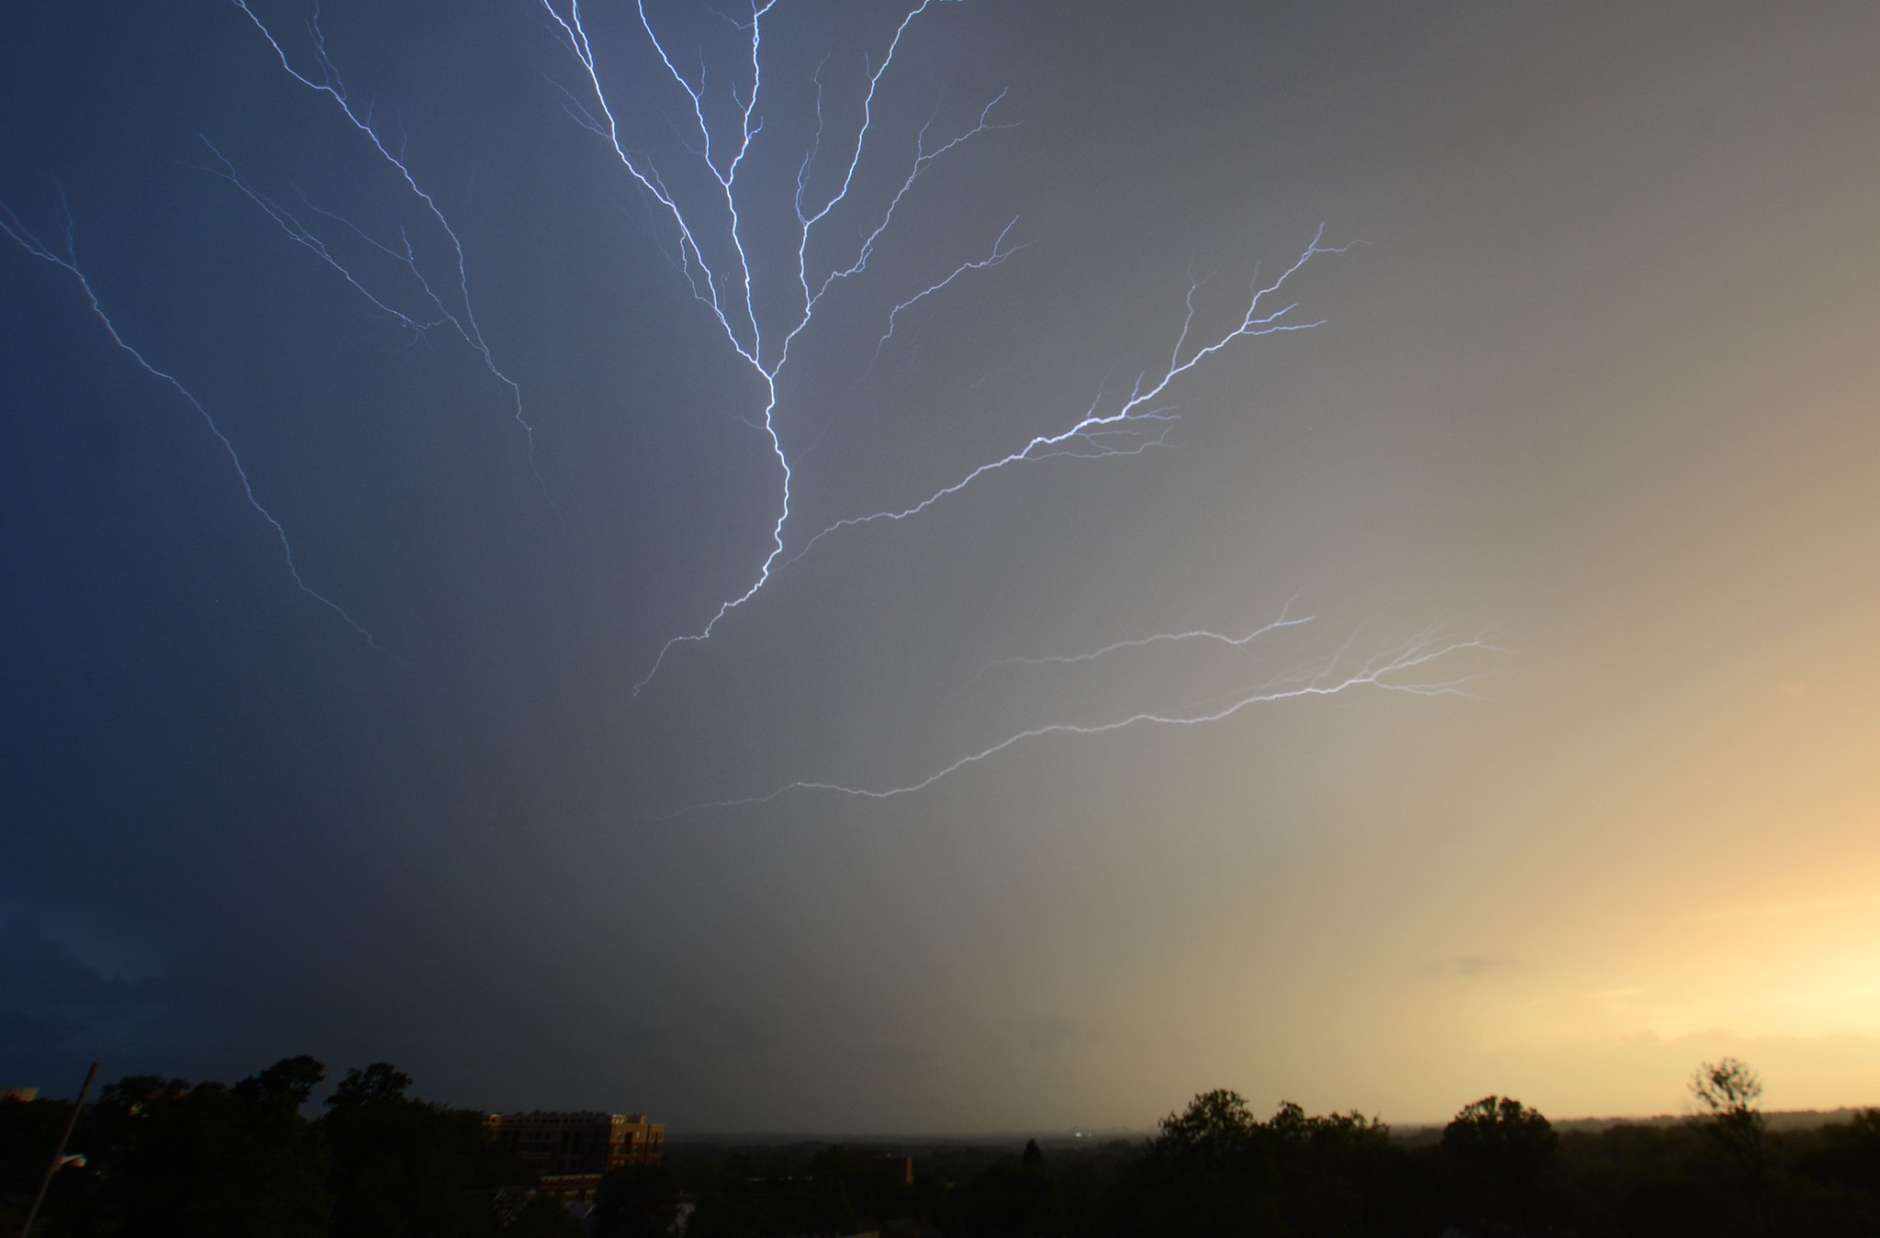 Day versus night, sun versus storm: An electric battle is waged above Washington Thursday night. (WTOP/Dave Dildine)